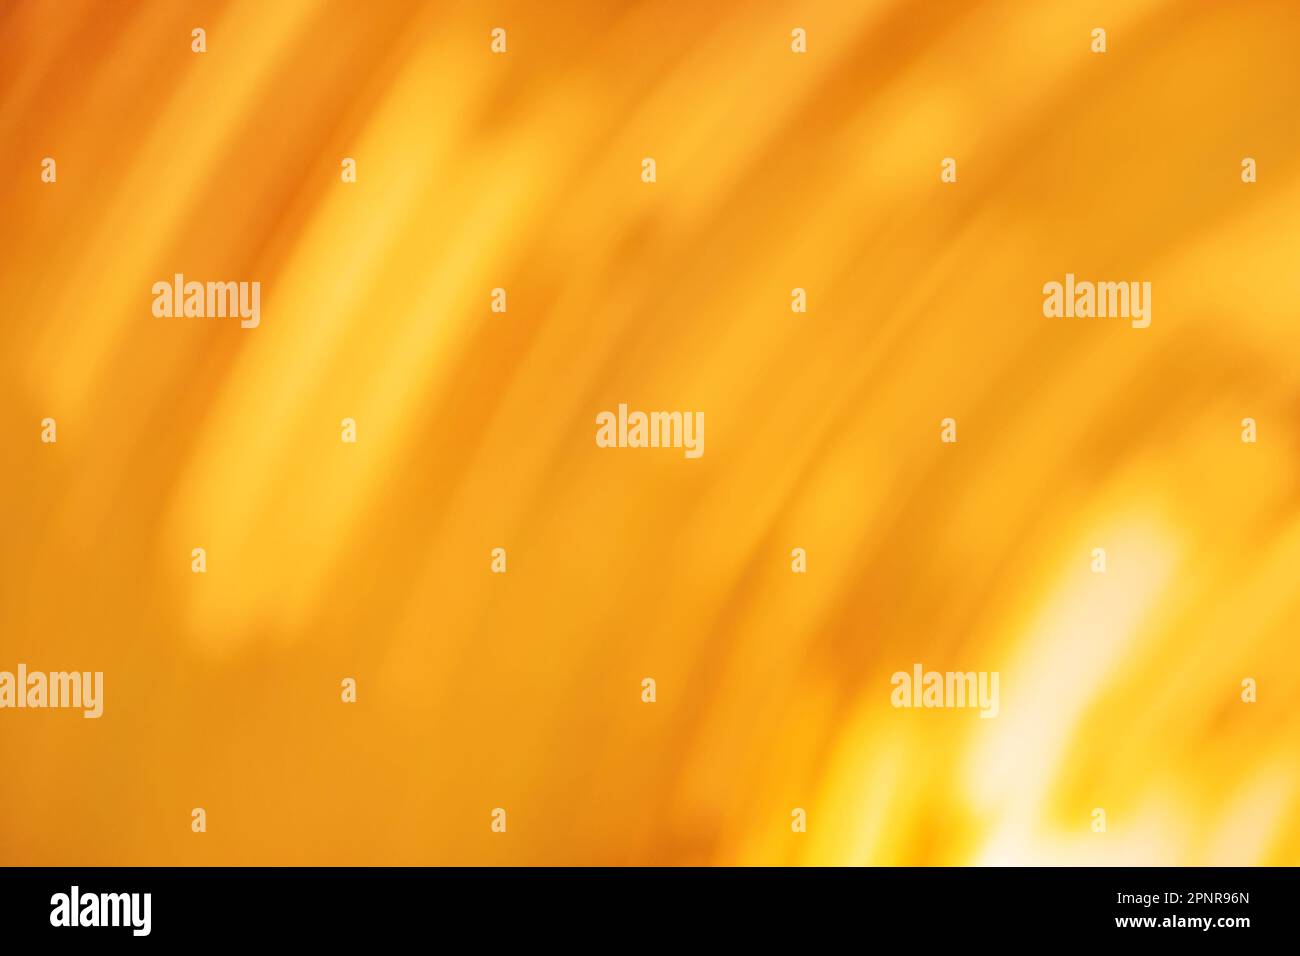 Gold yellow honeyed candied color wave effect abstract background. Blur melliferous honeyed background. Stock Photo